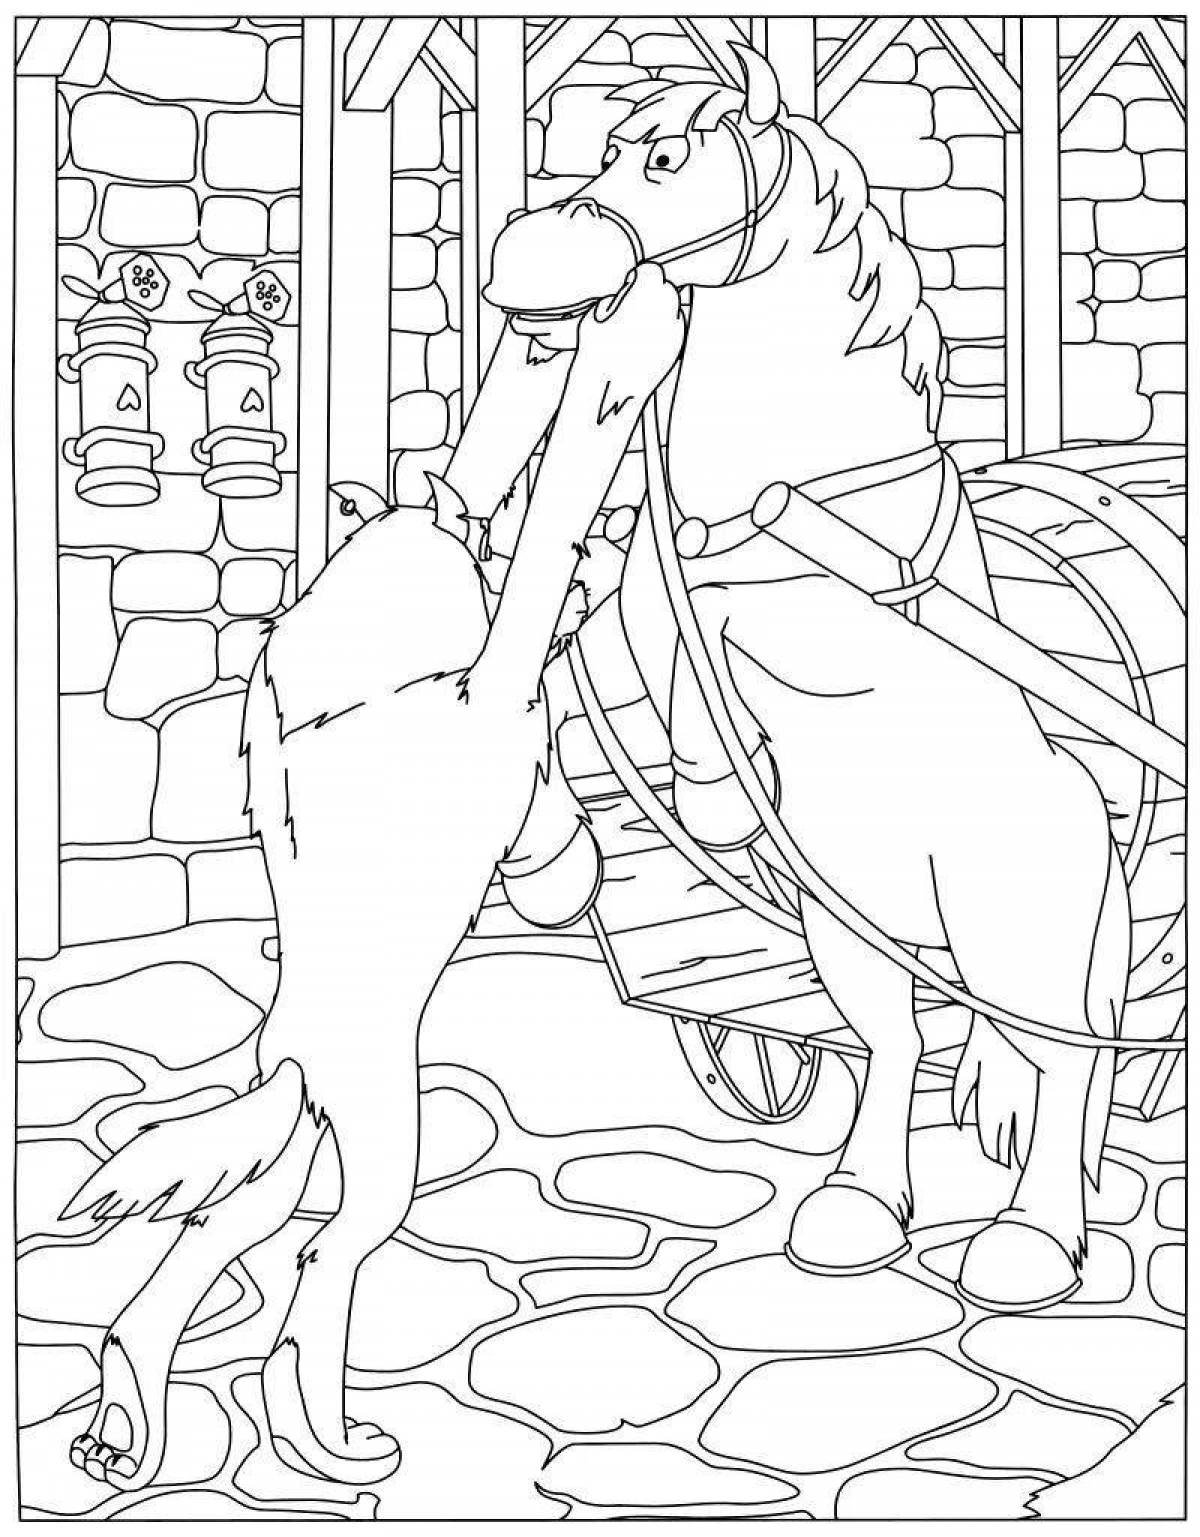 Glowing ivan tsarevich and the gray wolf 4 coloring book